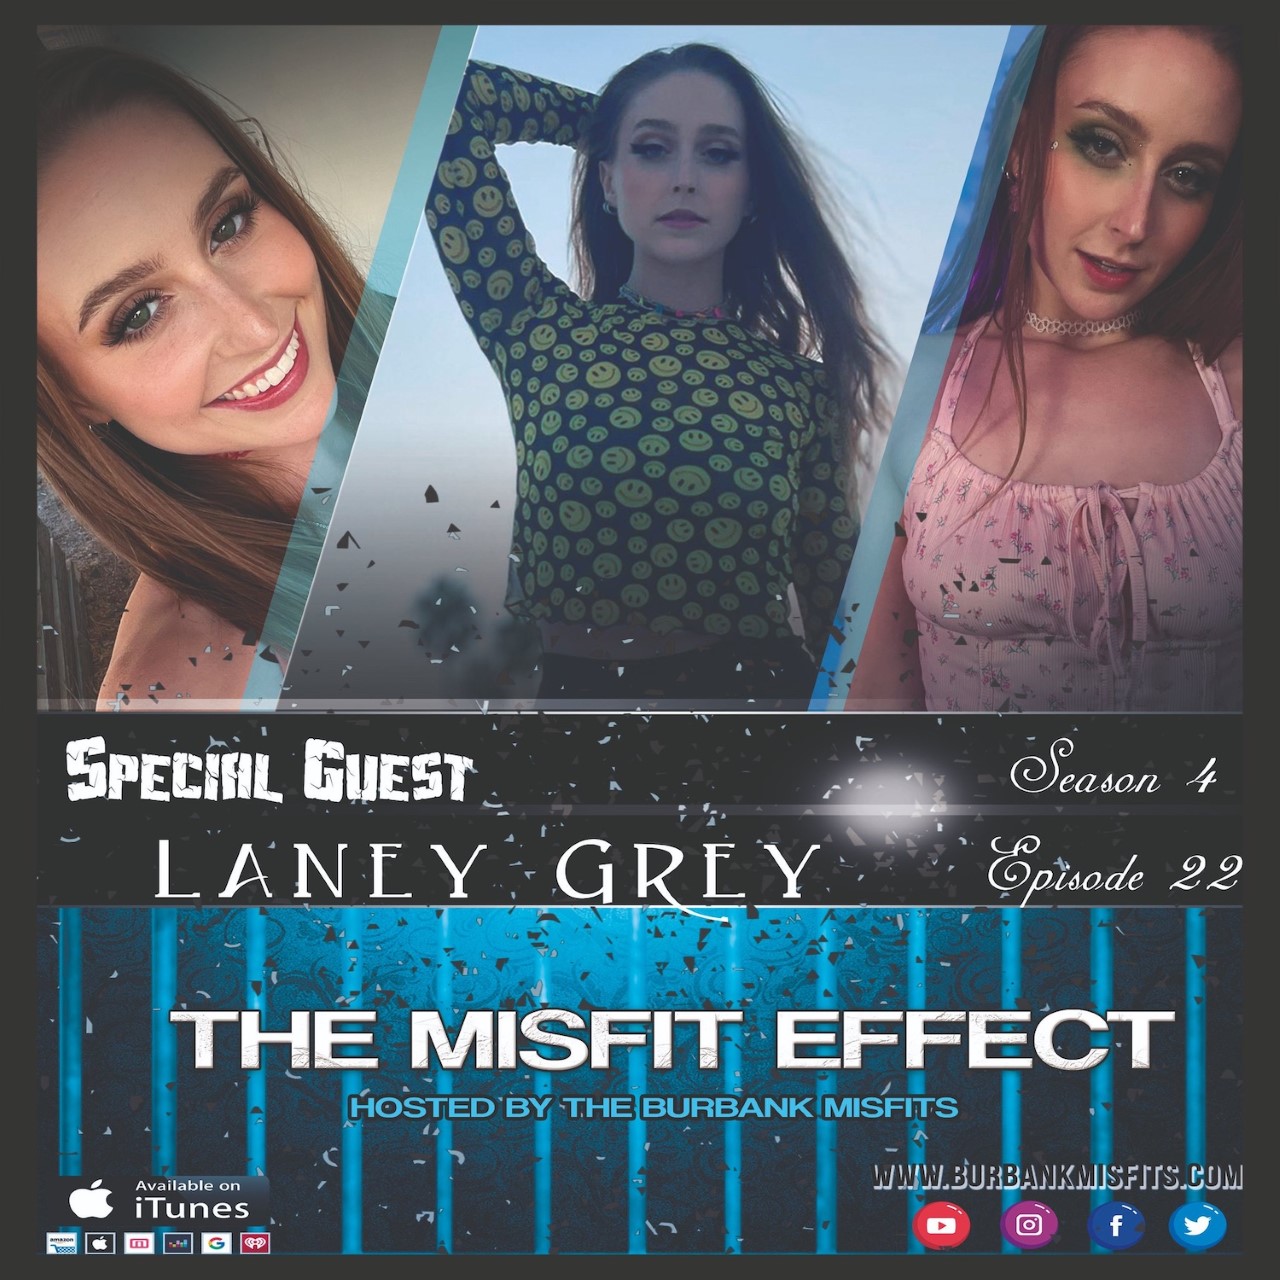 All Adult Network Laney Grey Guests On The Burbank Misfits Podcast In